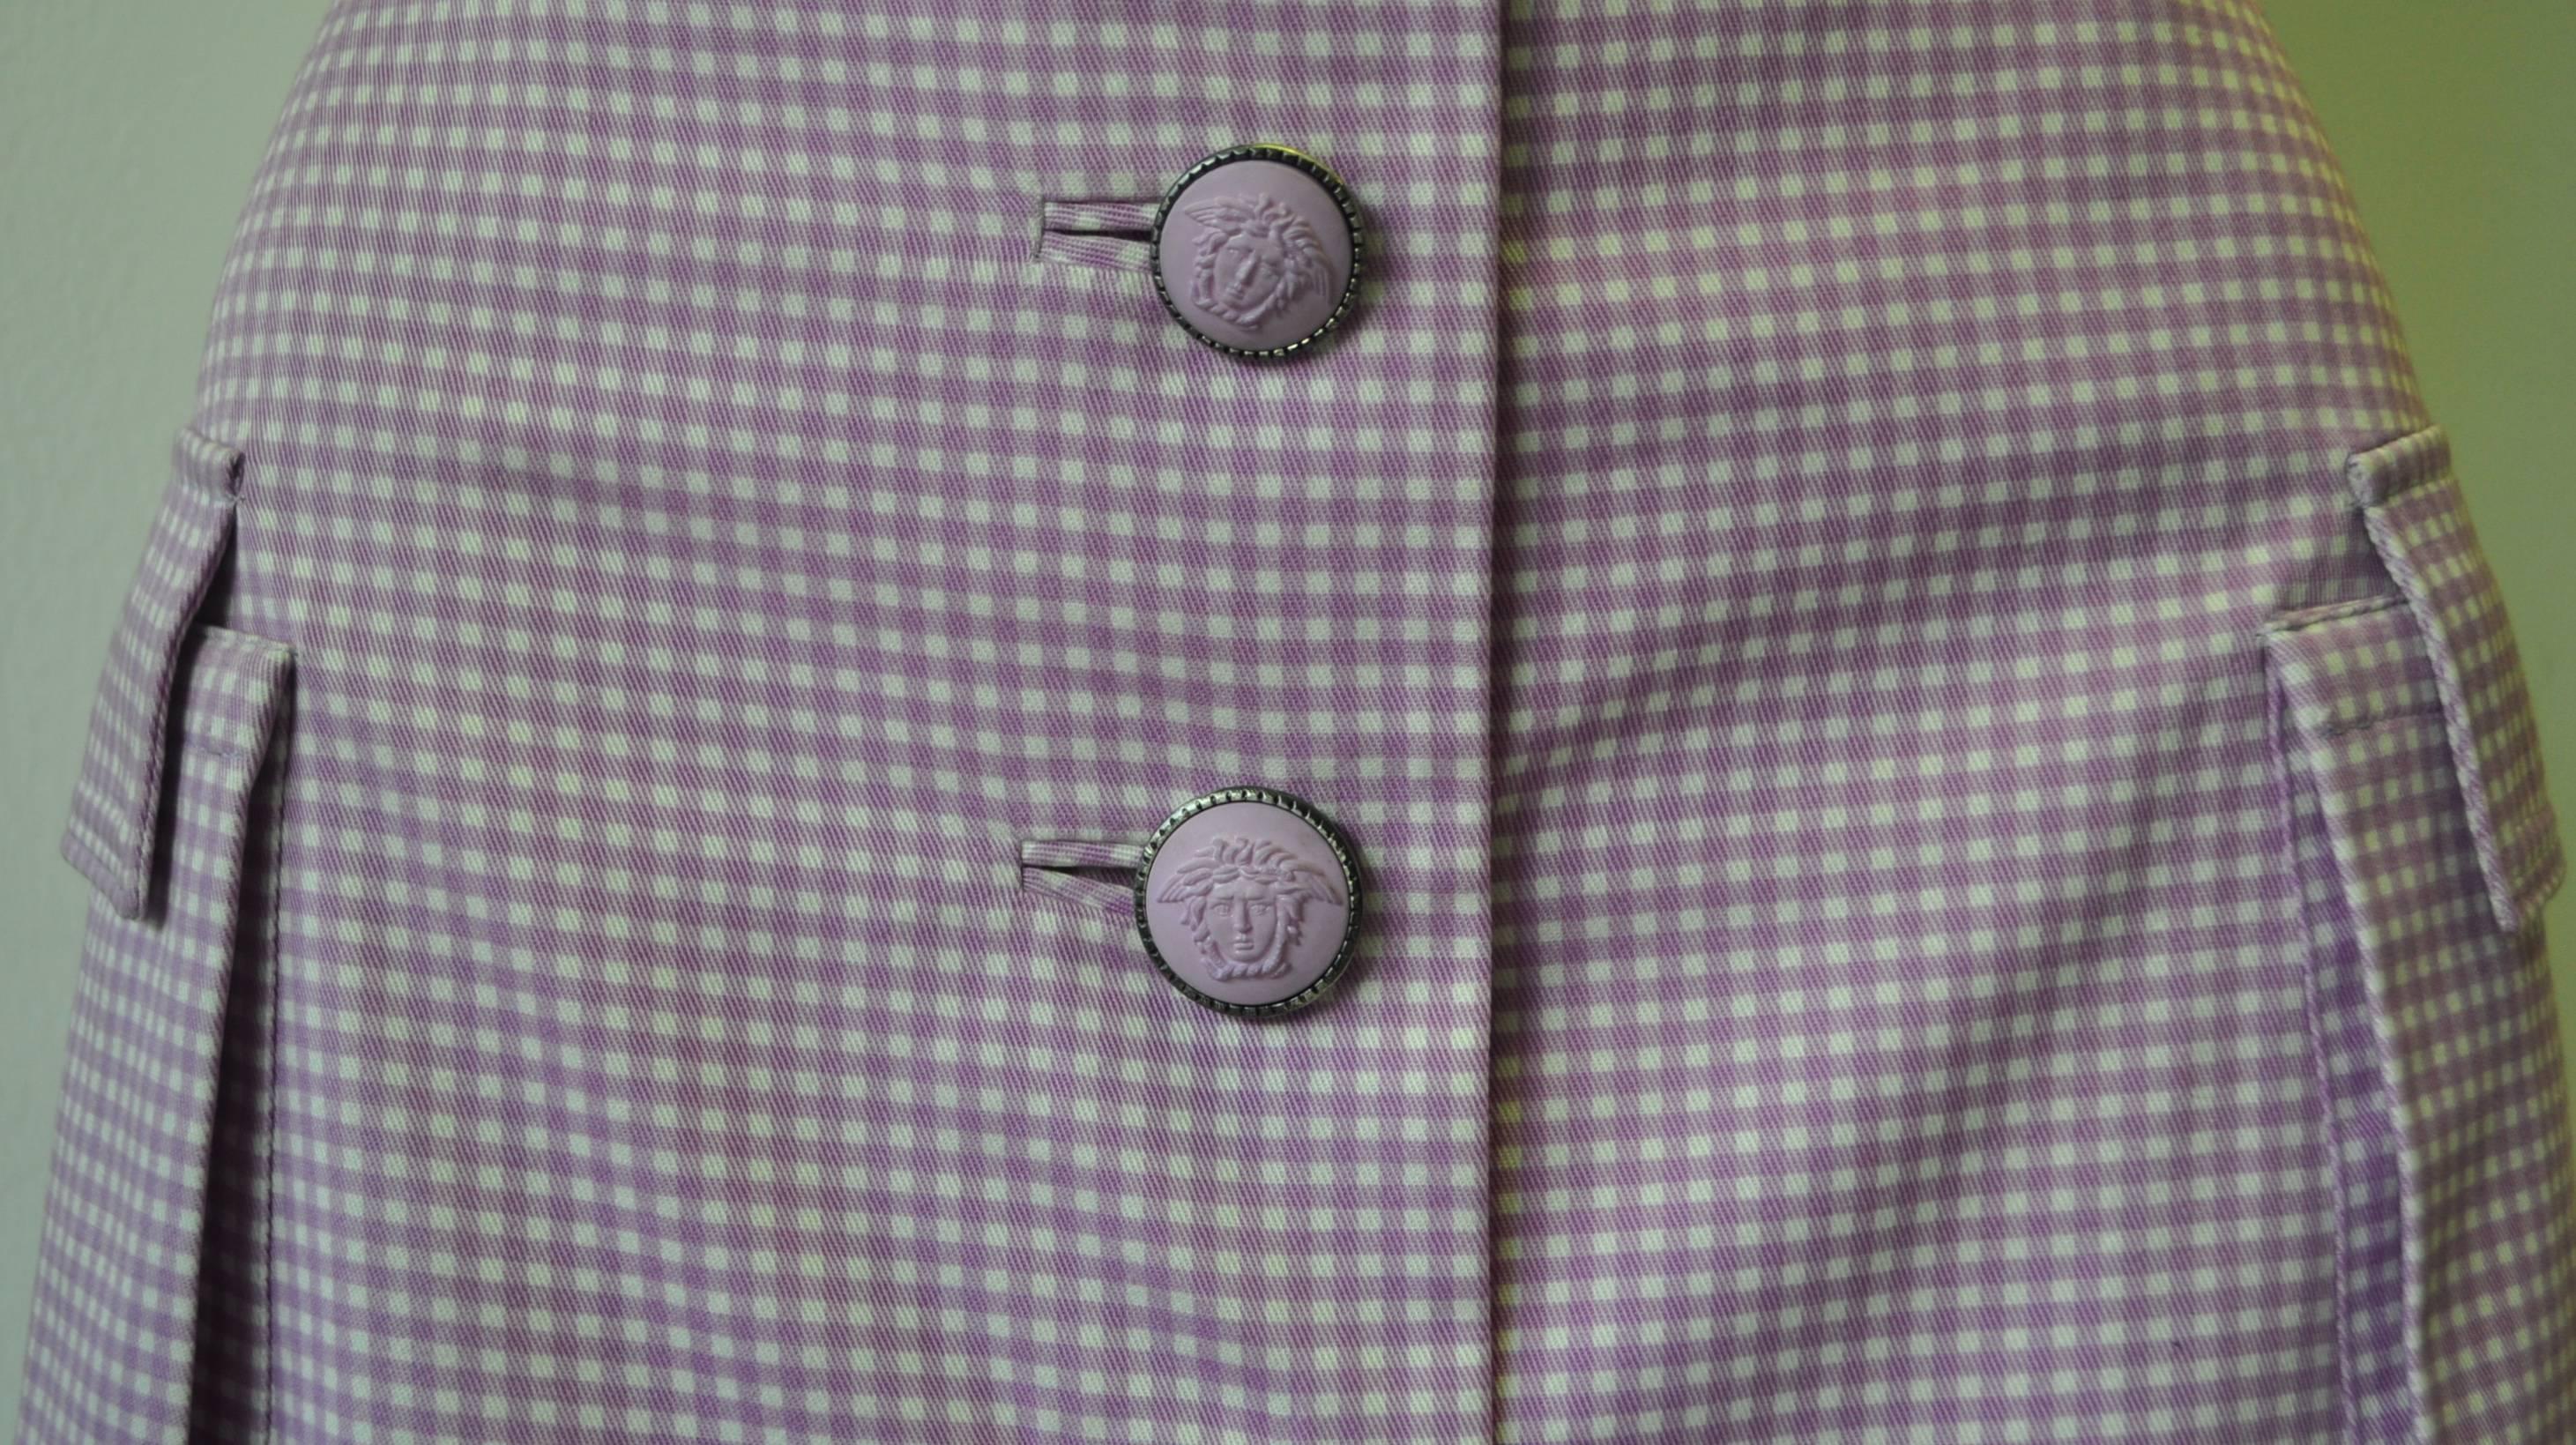 Women's Exceptional Gianni Versace Couture Check Skirt Suit featuring Medusa Buttons For Sale